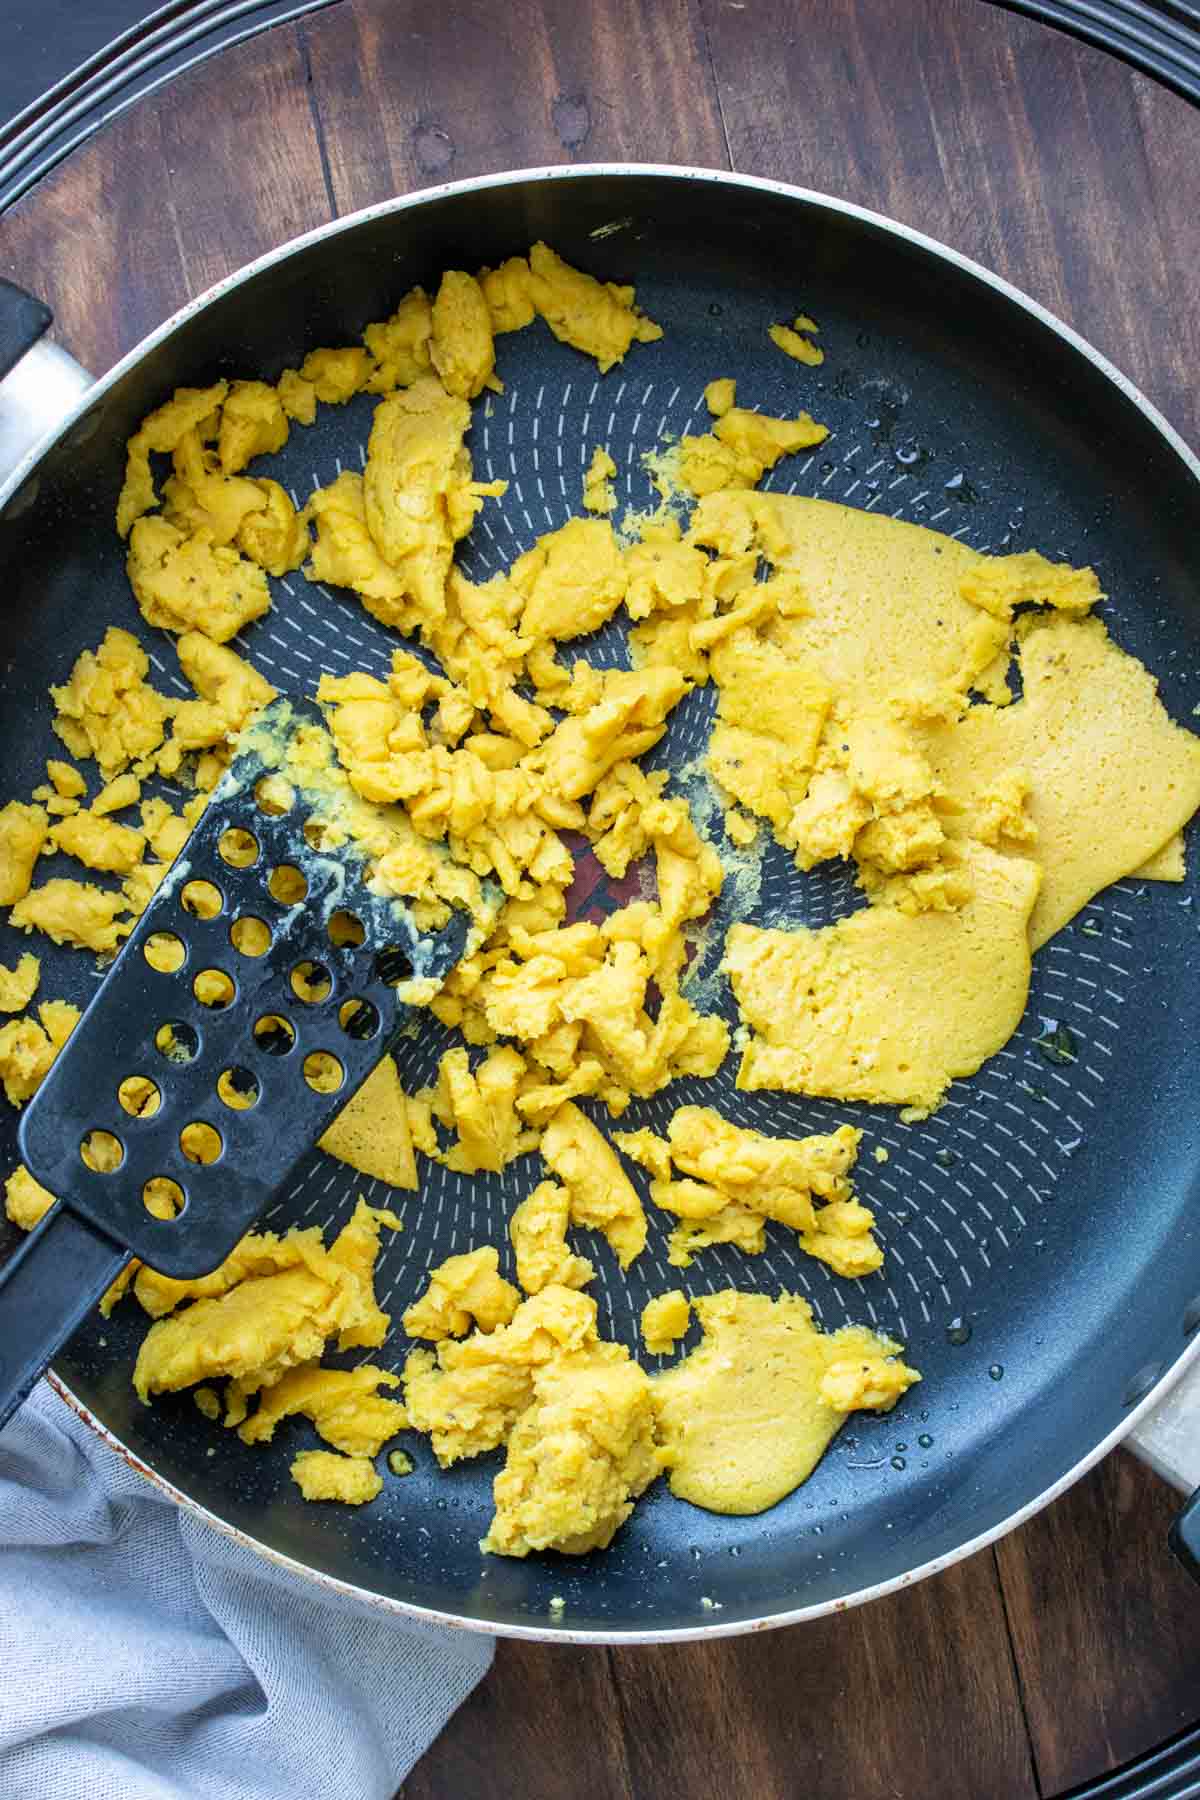 Spatula breaking up cooked chickpea pancake in a pan.